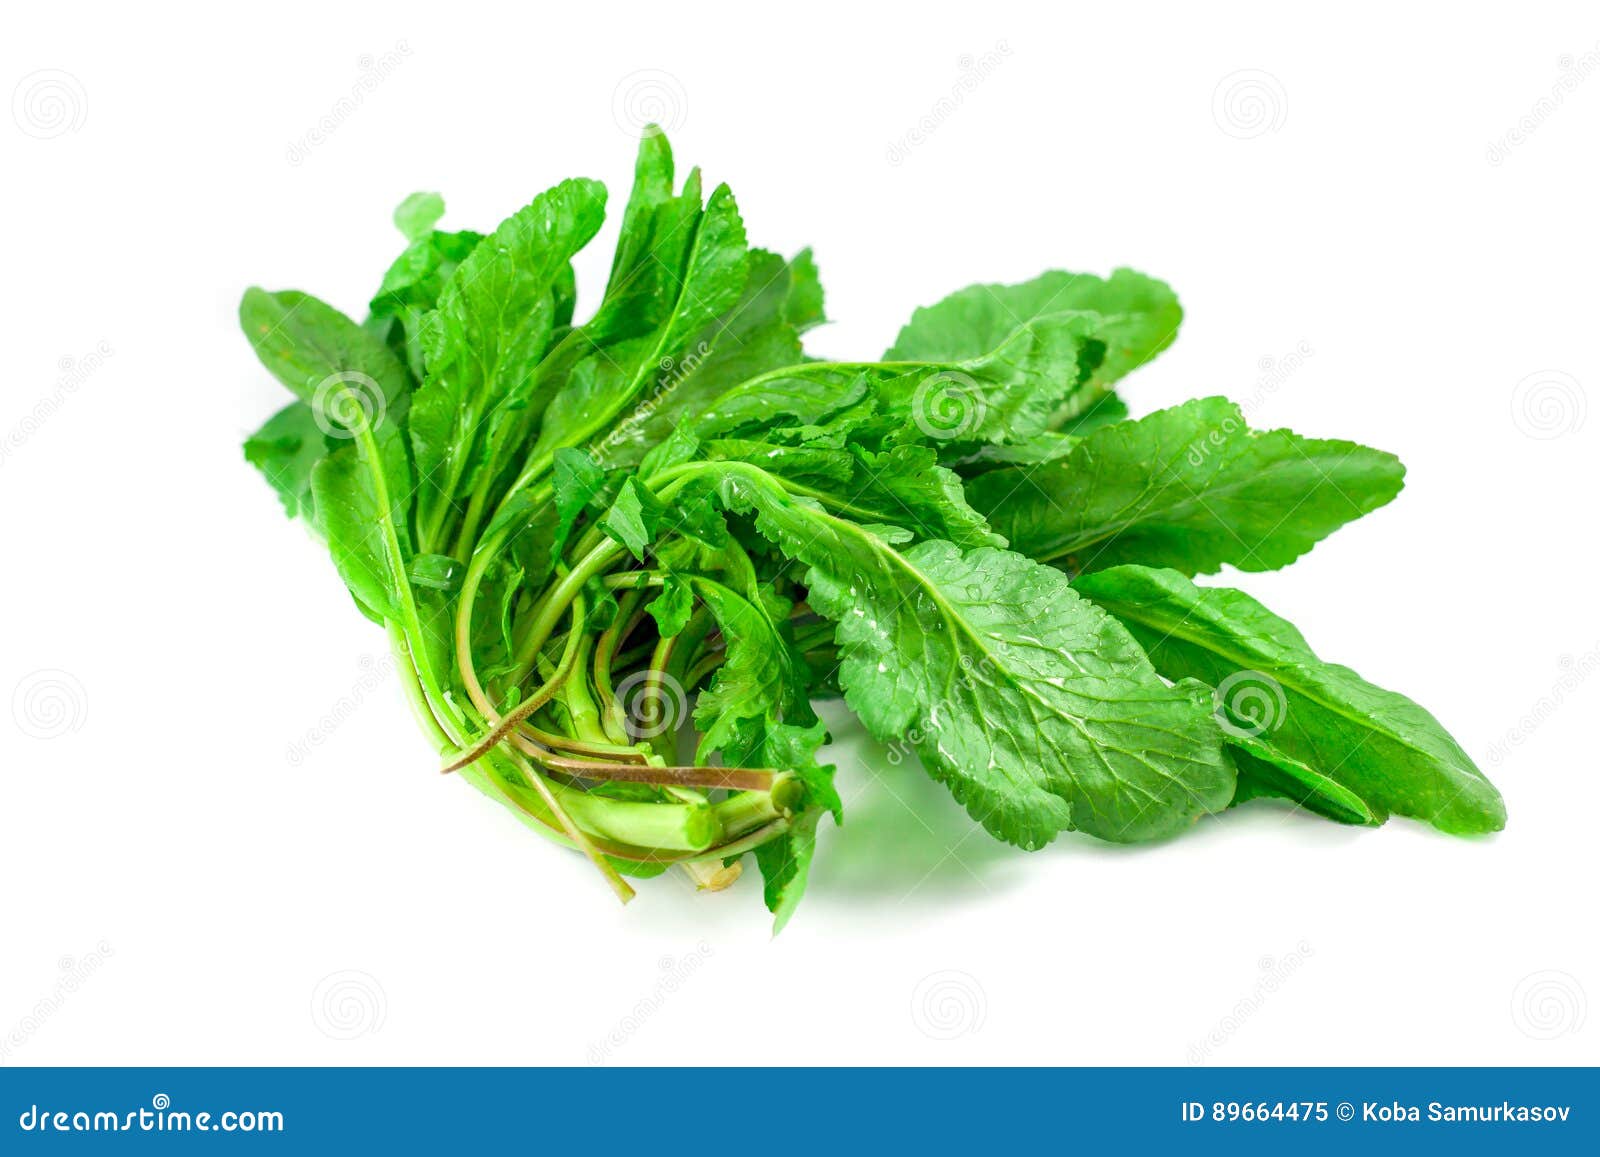 bunch of spinach  on white background